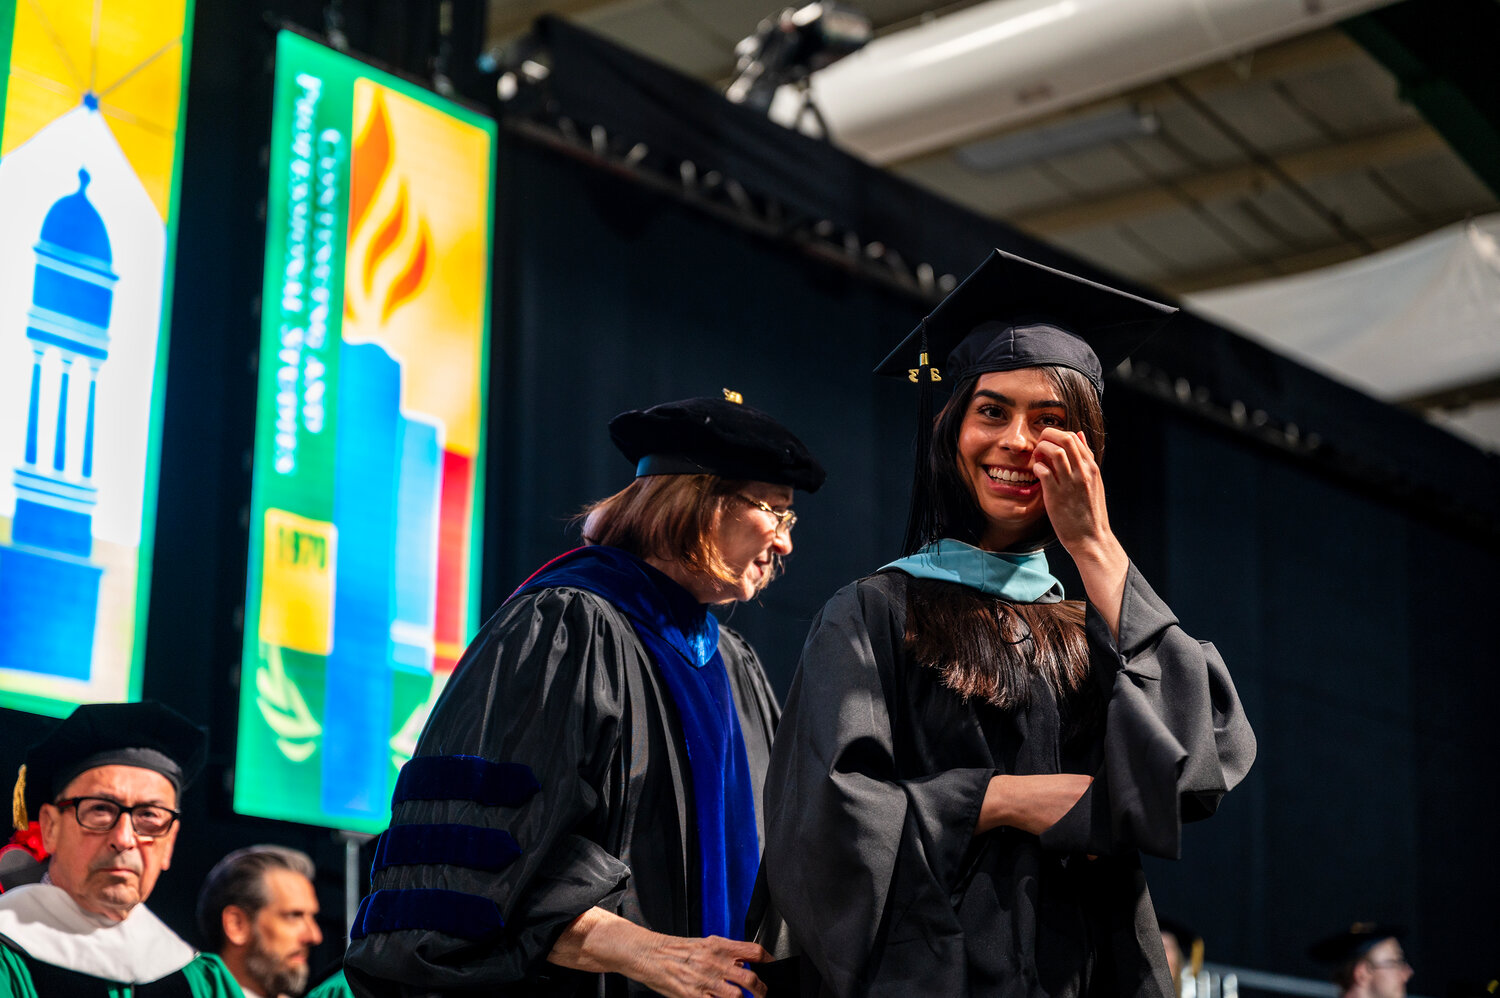 A graduate at Manhattan College’s commencement is jubilant as she reaches the stage to receive her diploma Wednesday.